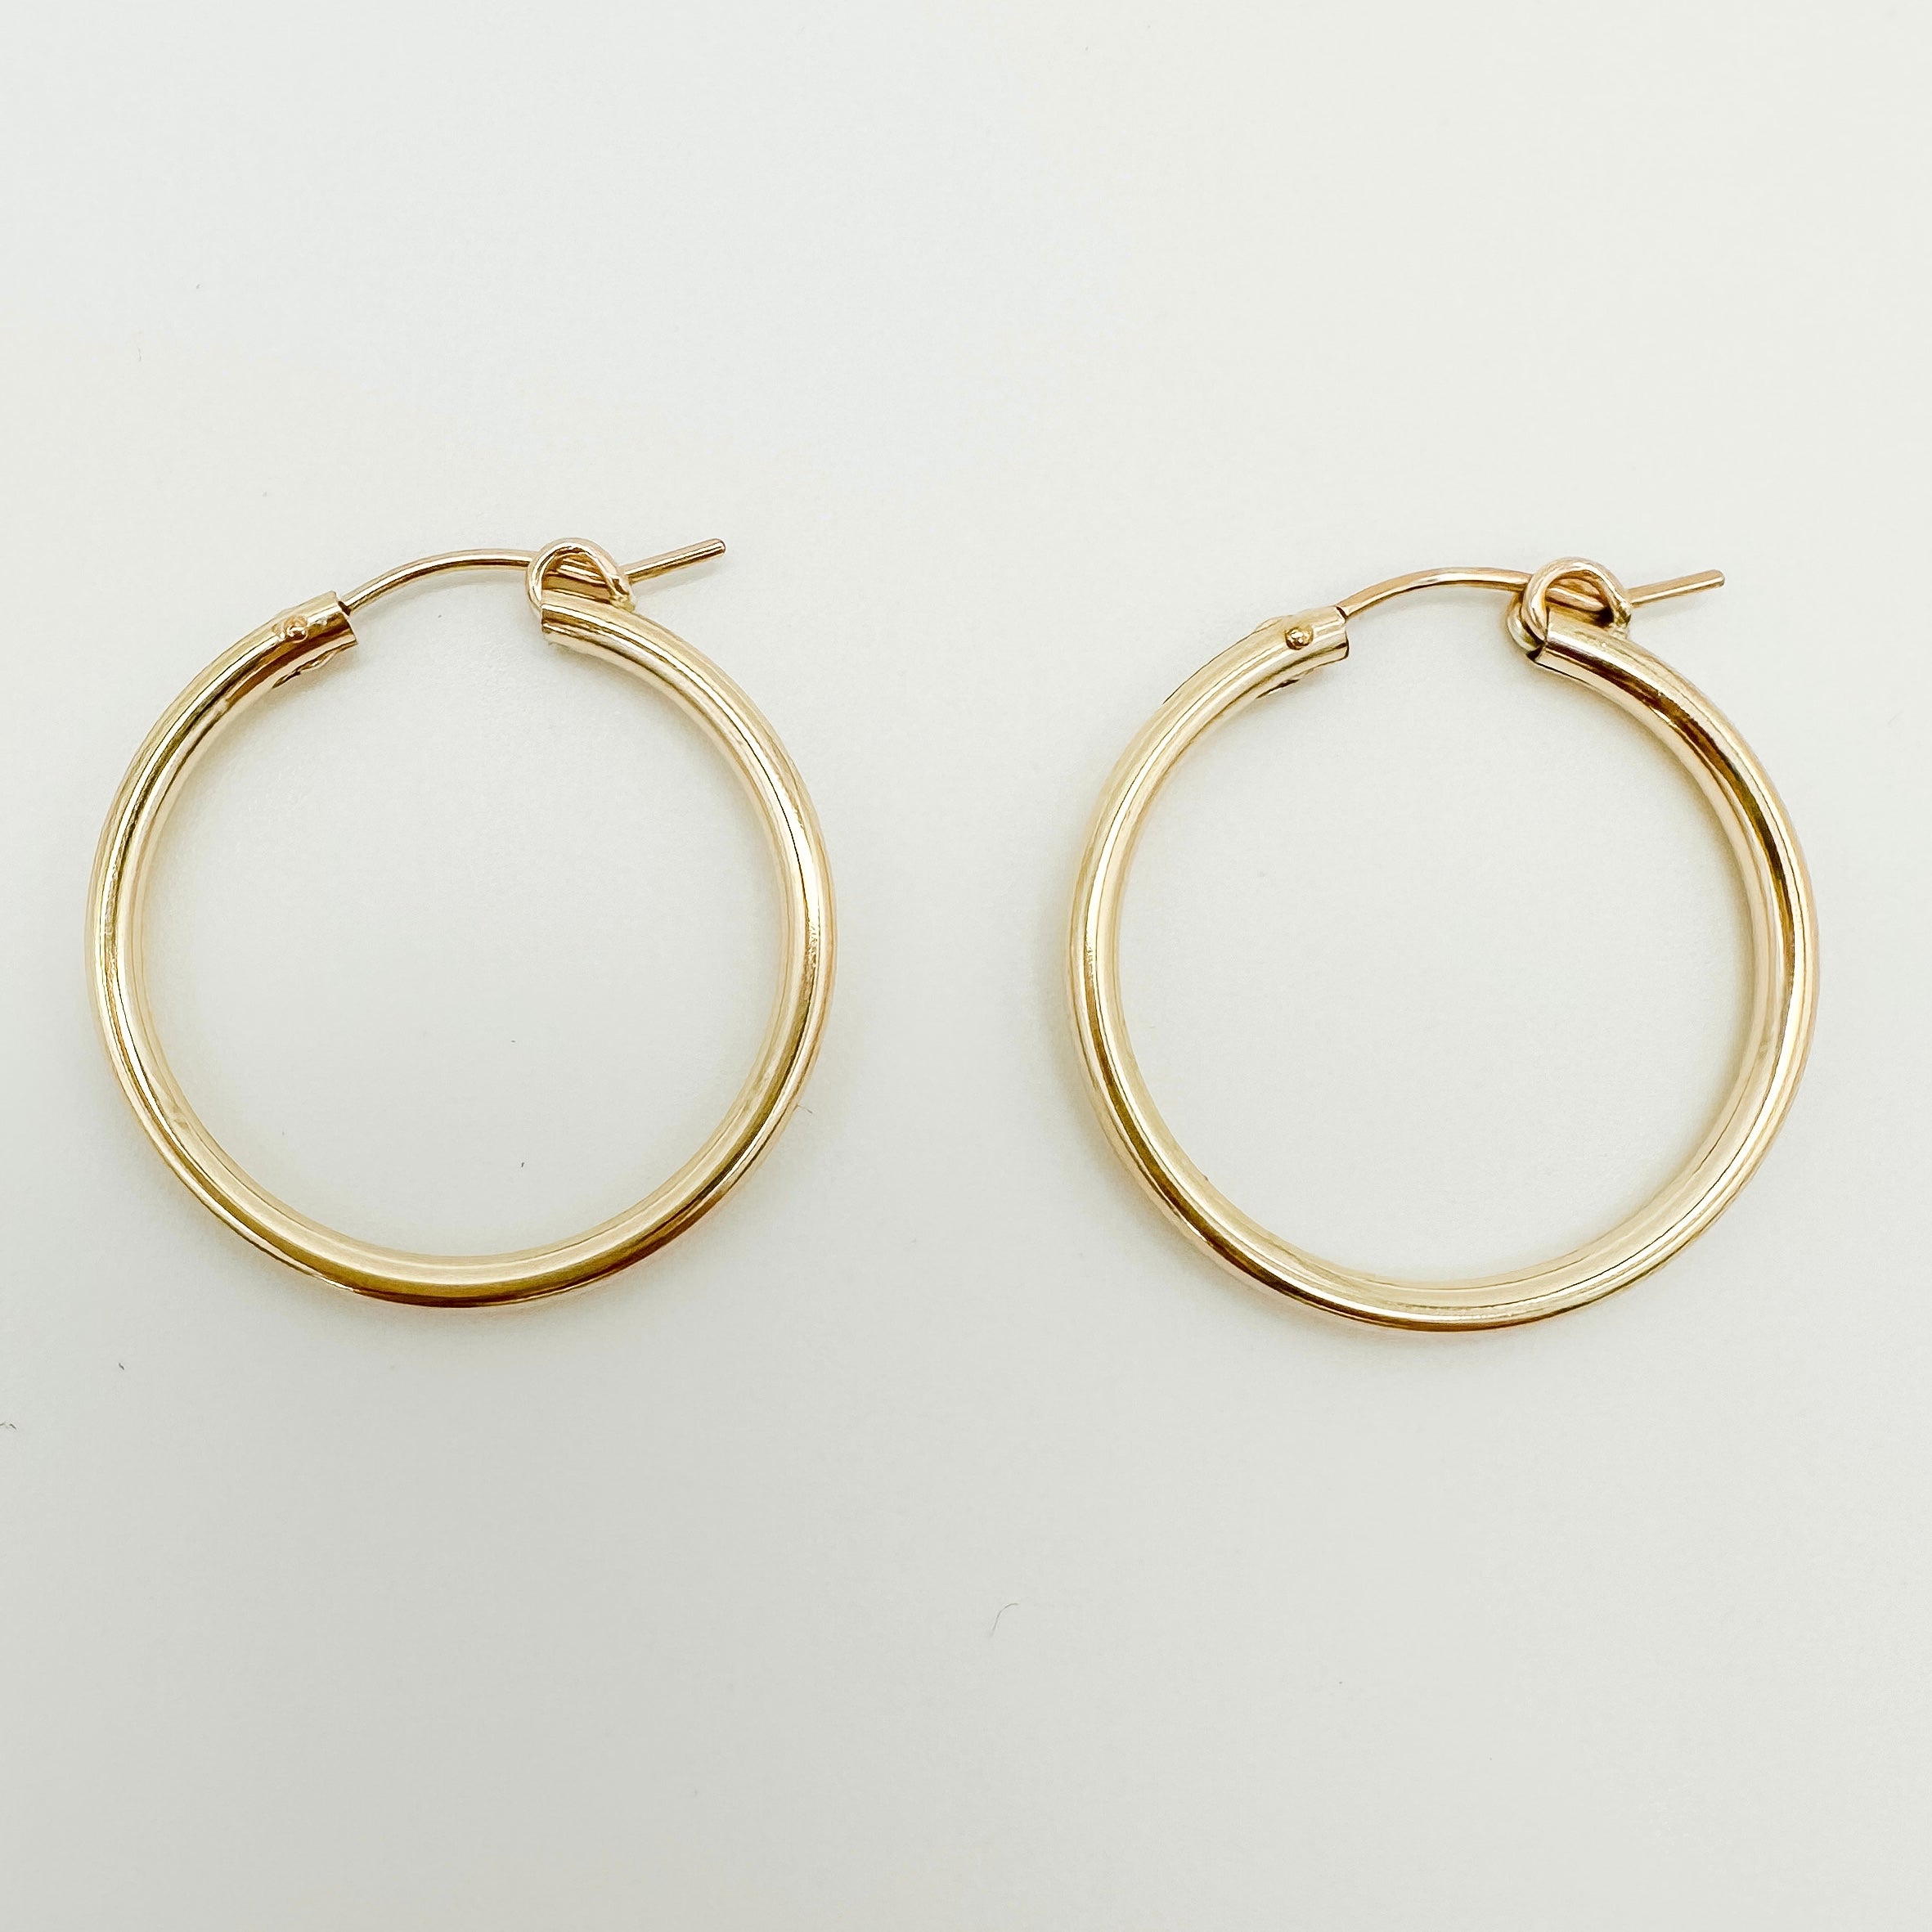 gold filled everyday hoops / essbe jewelry supply / hoops for everyday / gold-filled hoop earrings